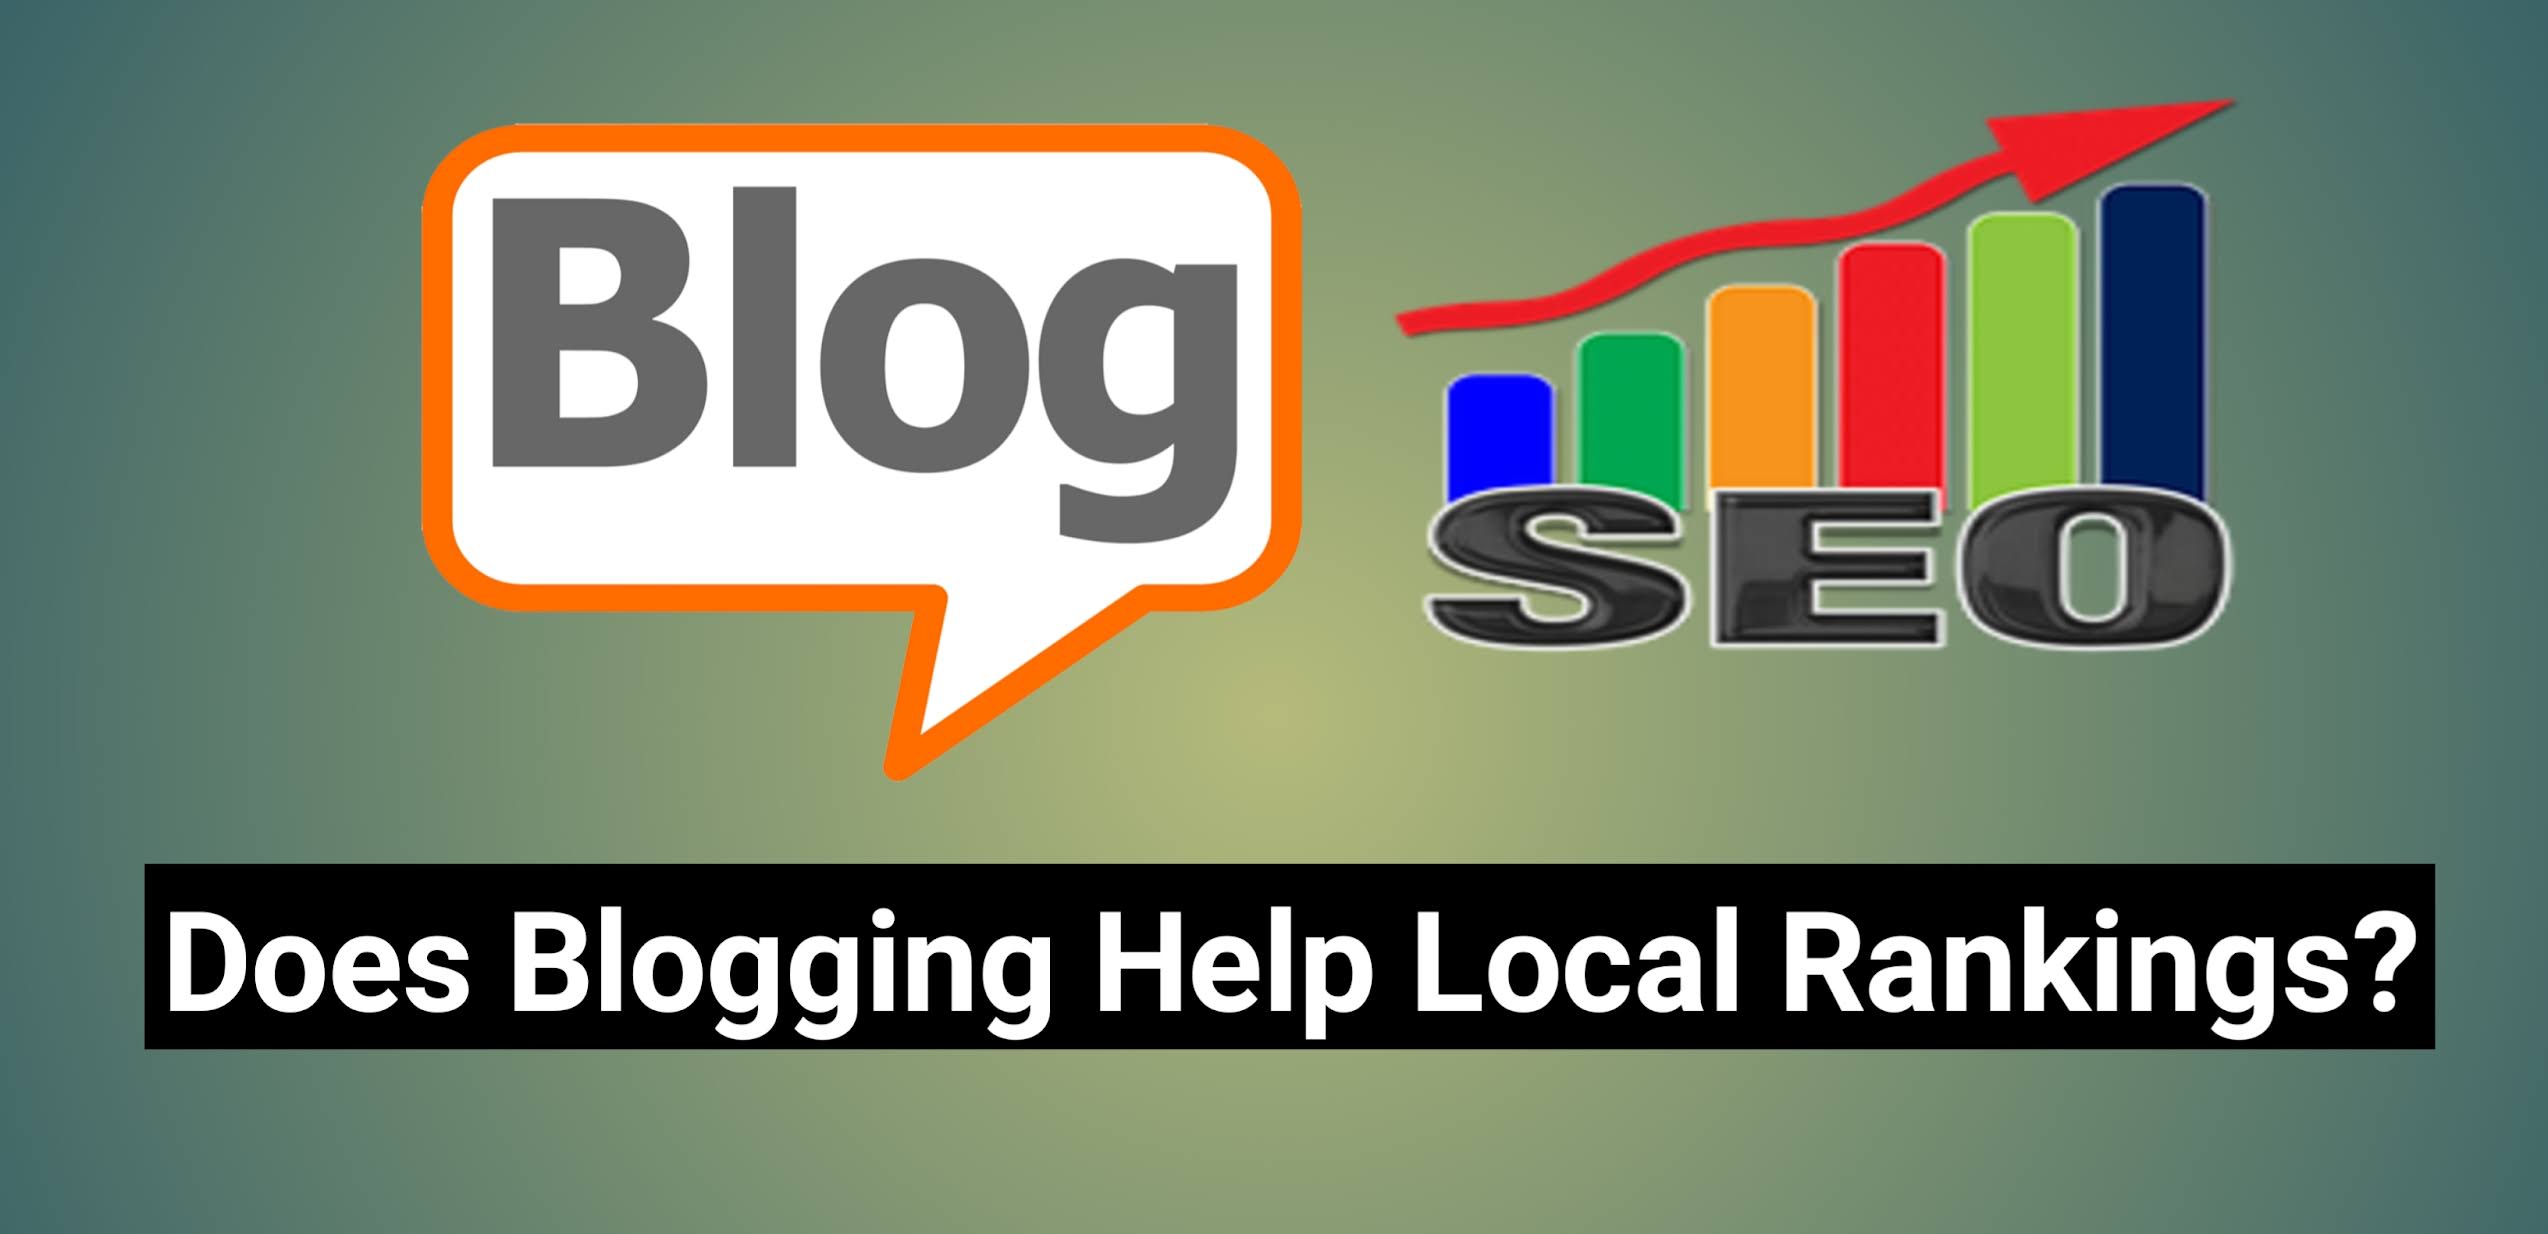 Does Blogging Help Local Rankings?